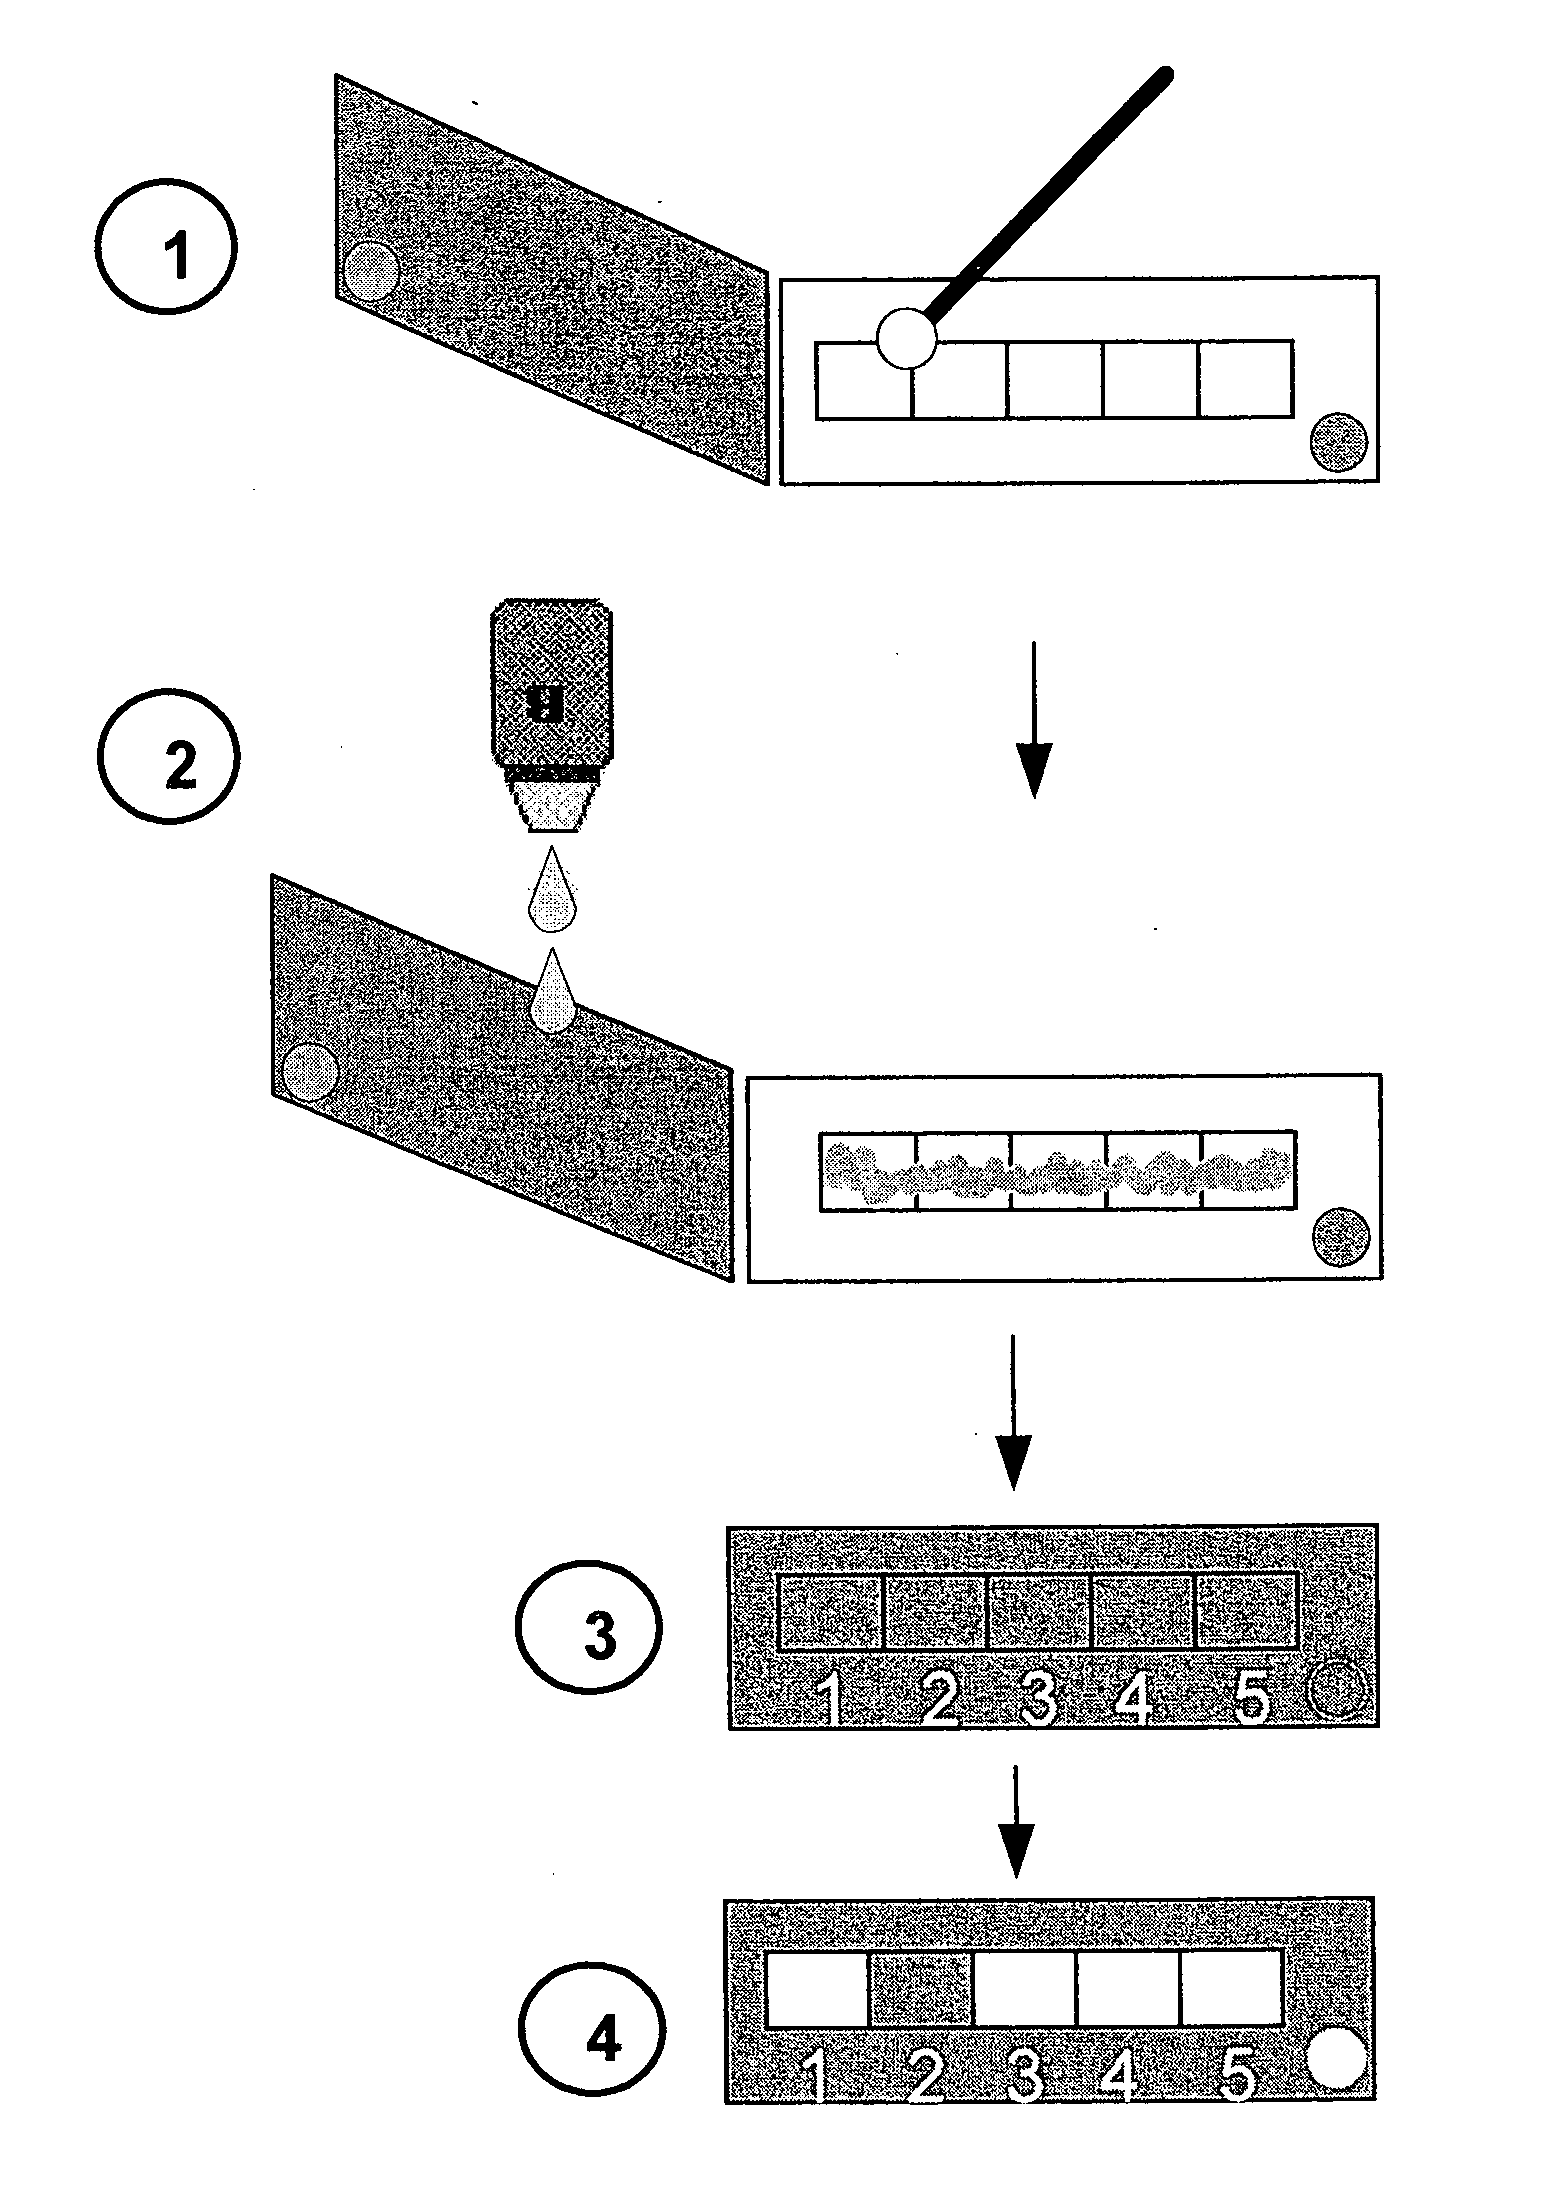 Methods and Kits for Direct Detection and Susceptibility Profiling of Beta-Lactam Resistant Bacteria